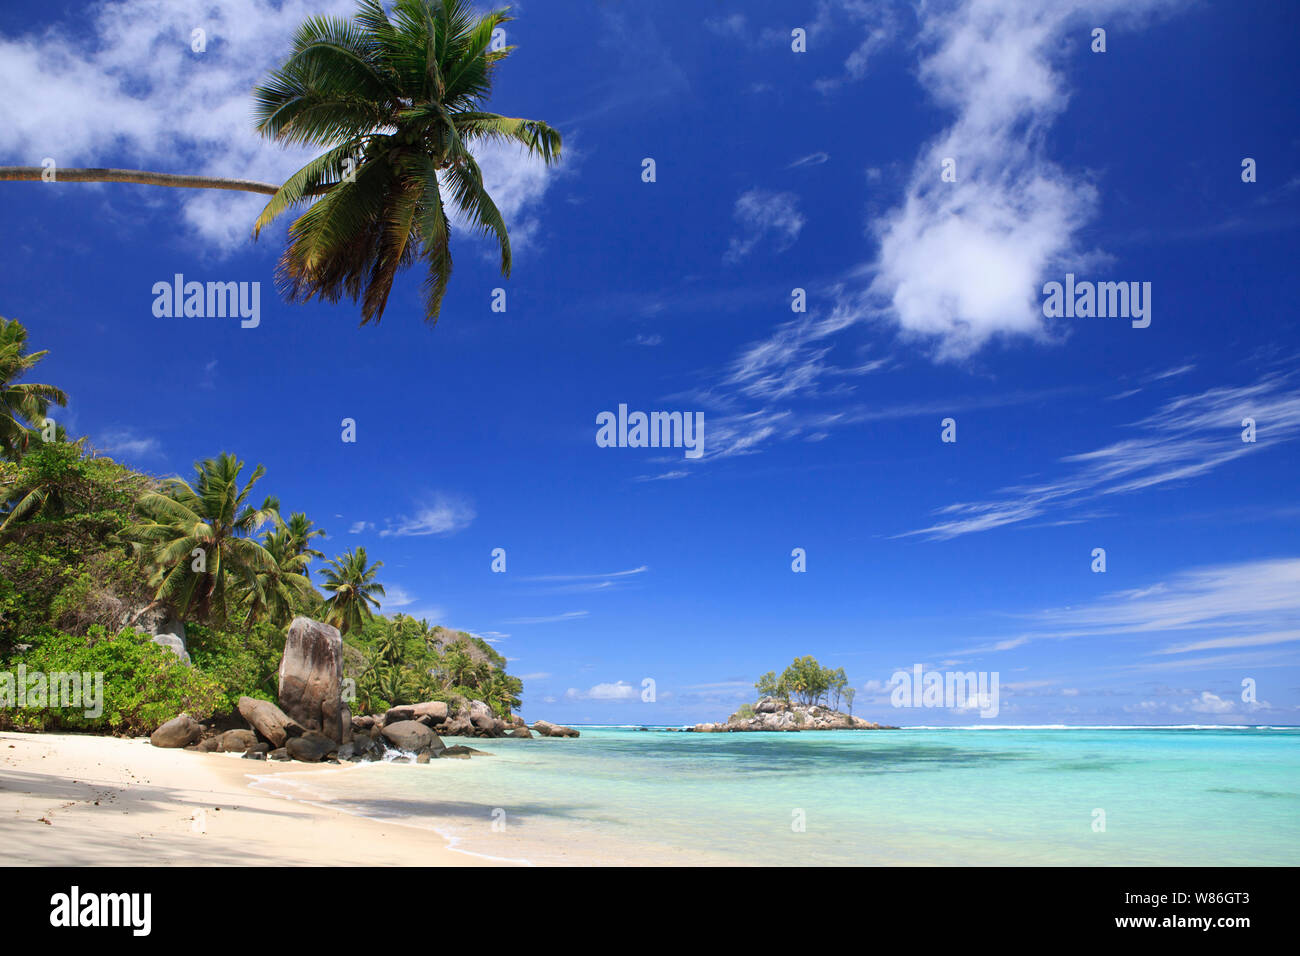 Scenic of the island of Mahe, Seychelles, Indian Ocean Stock Photo